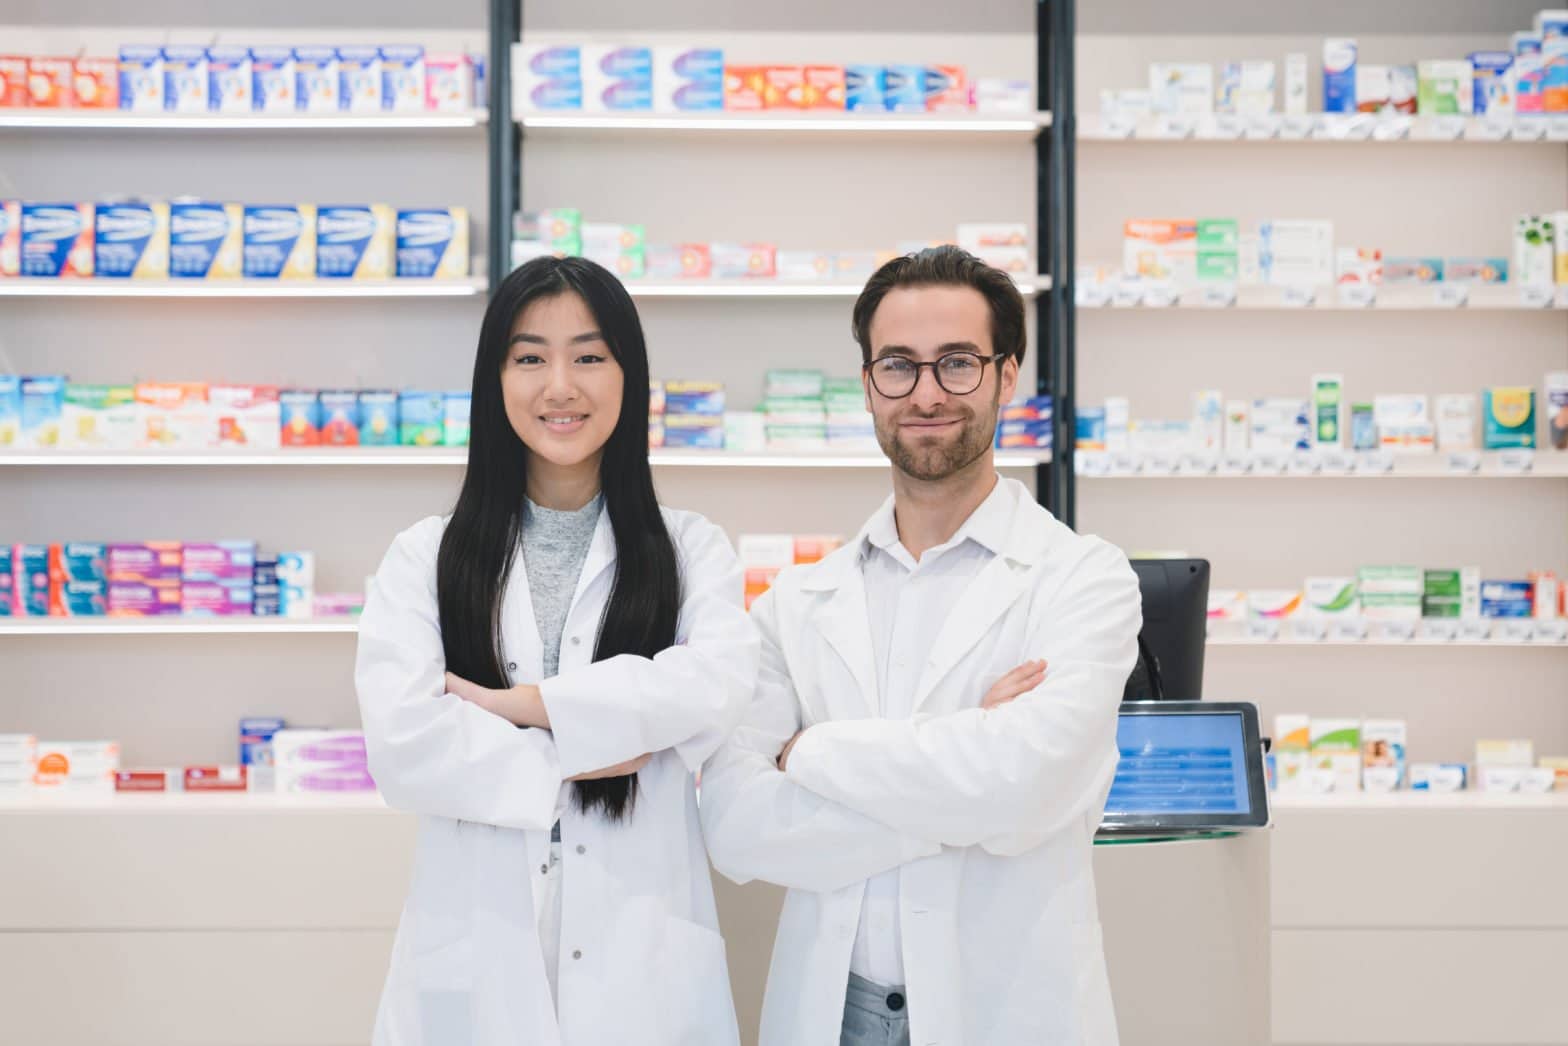 Two Pharmacists standing in front of medication shelves within the pharmacy